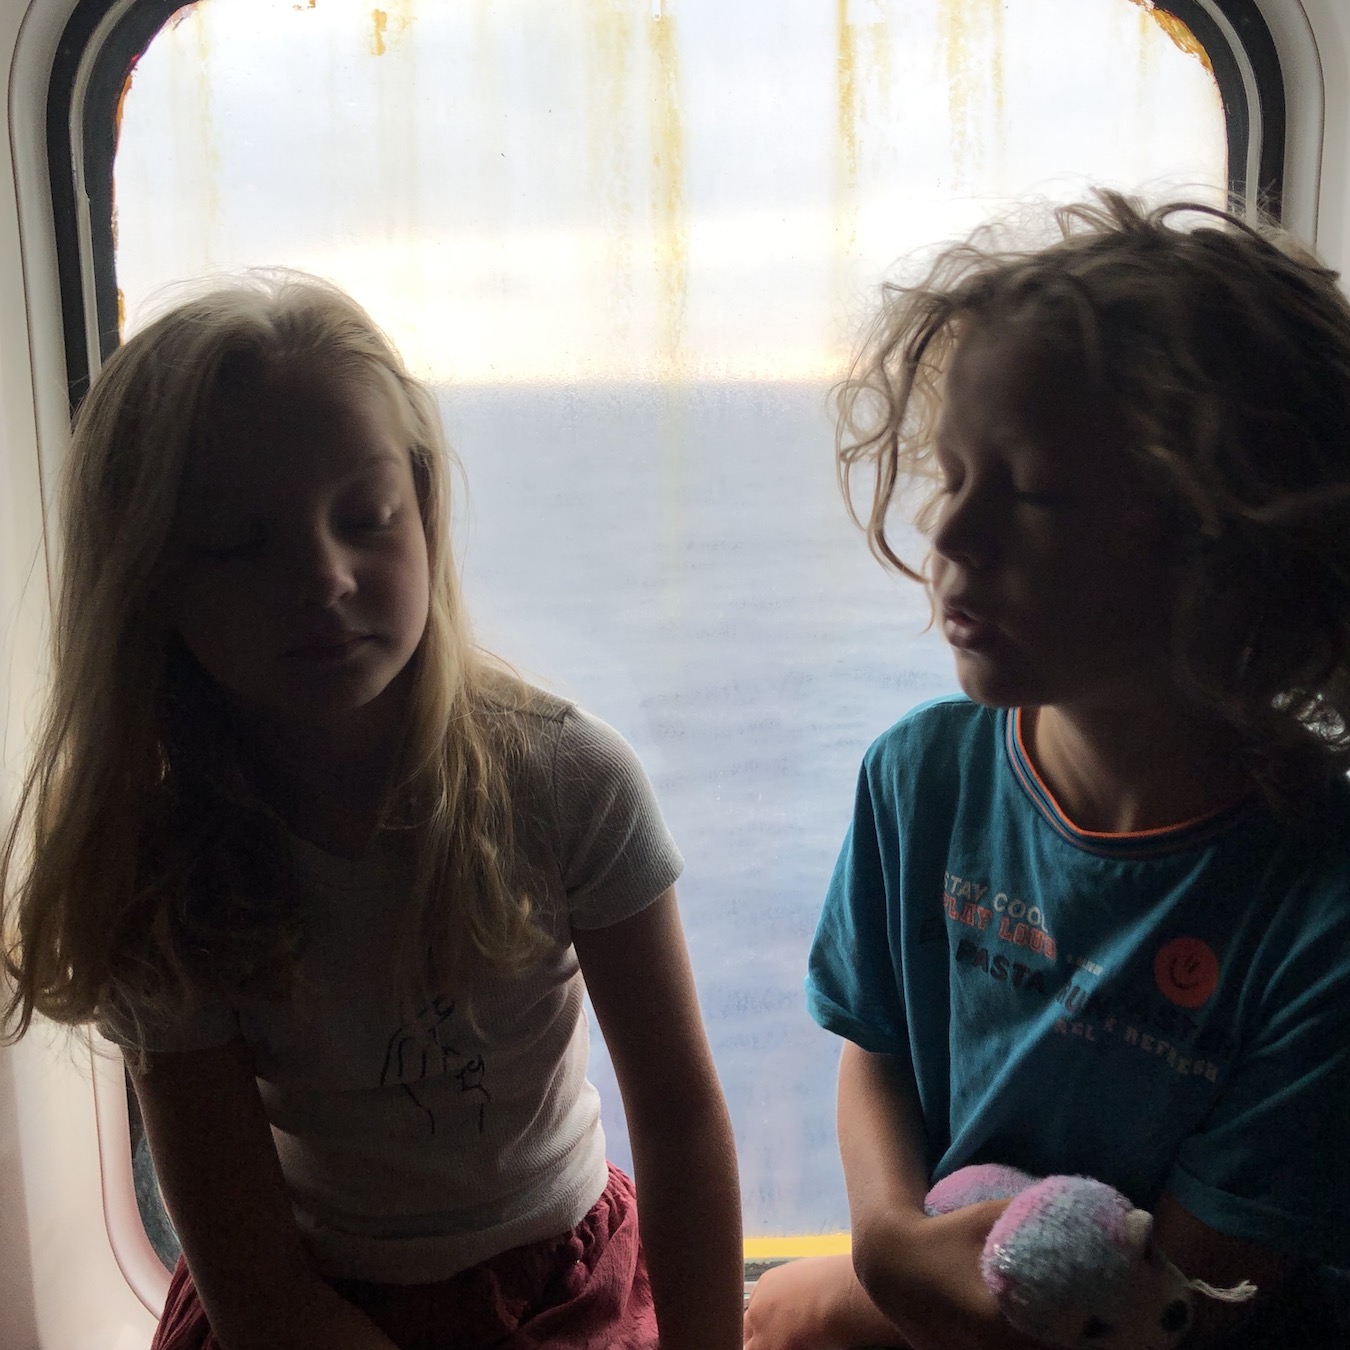 On the ferry, inside our cabin, with a view!